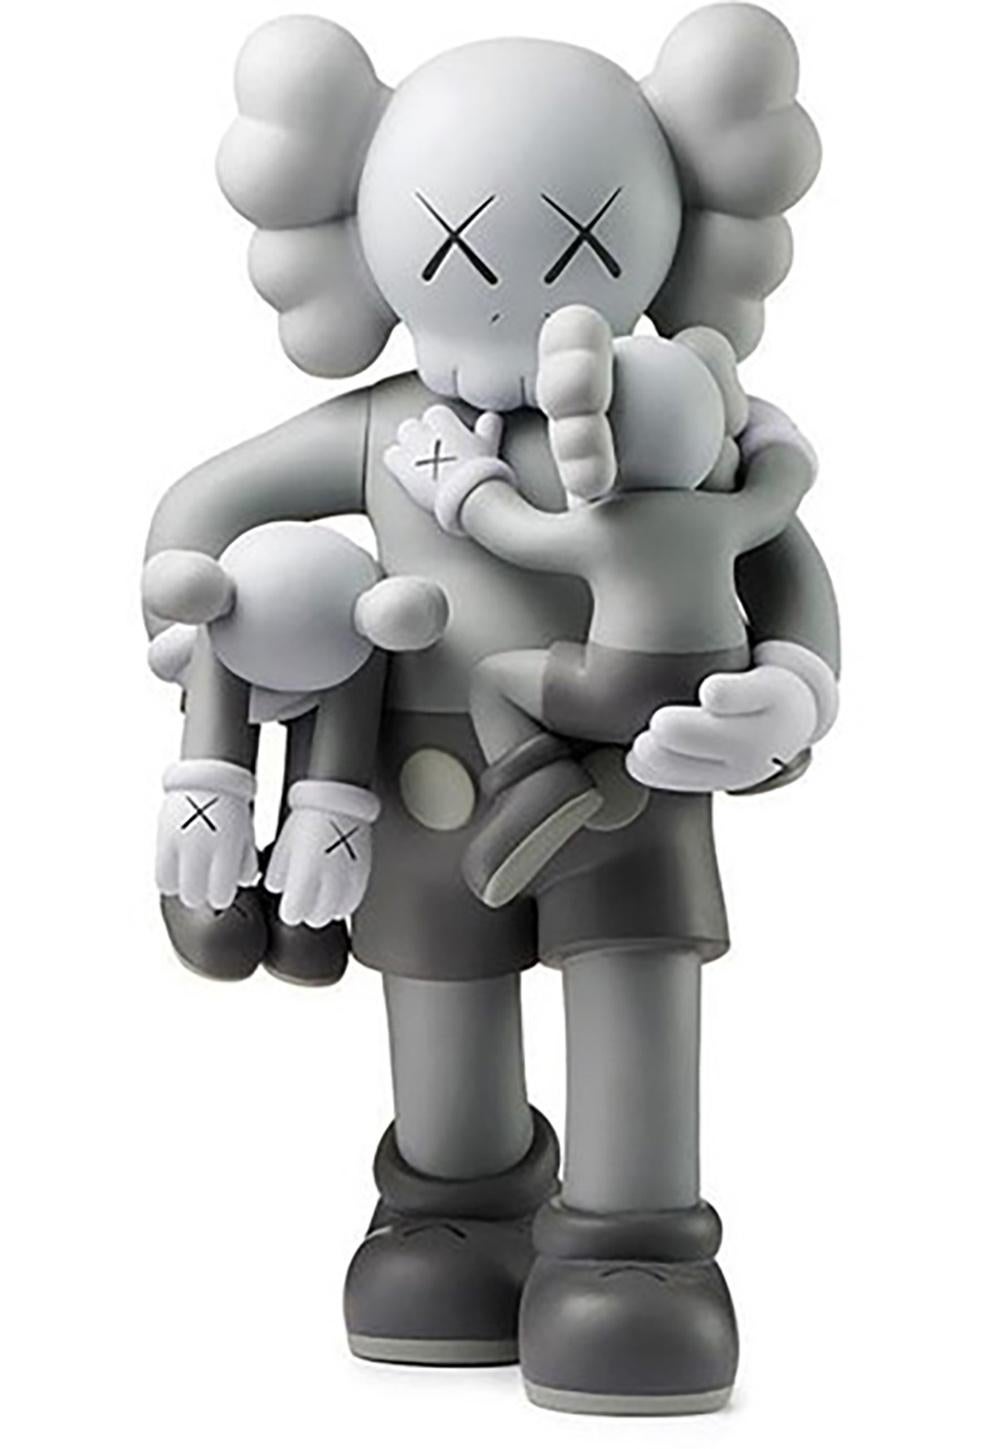 what is kaws